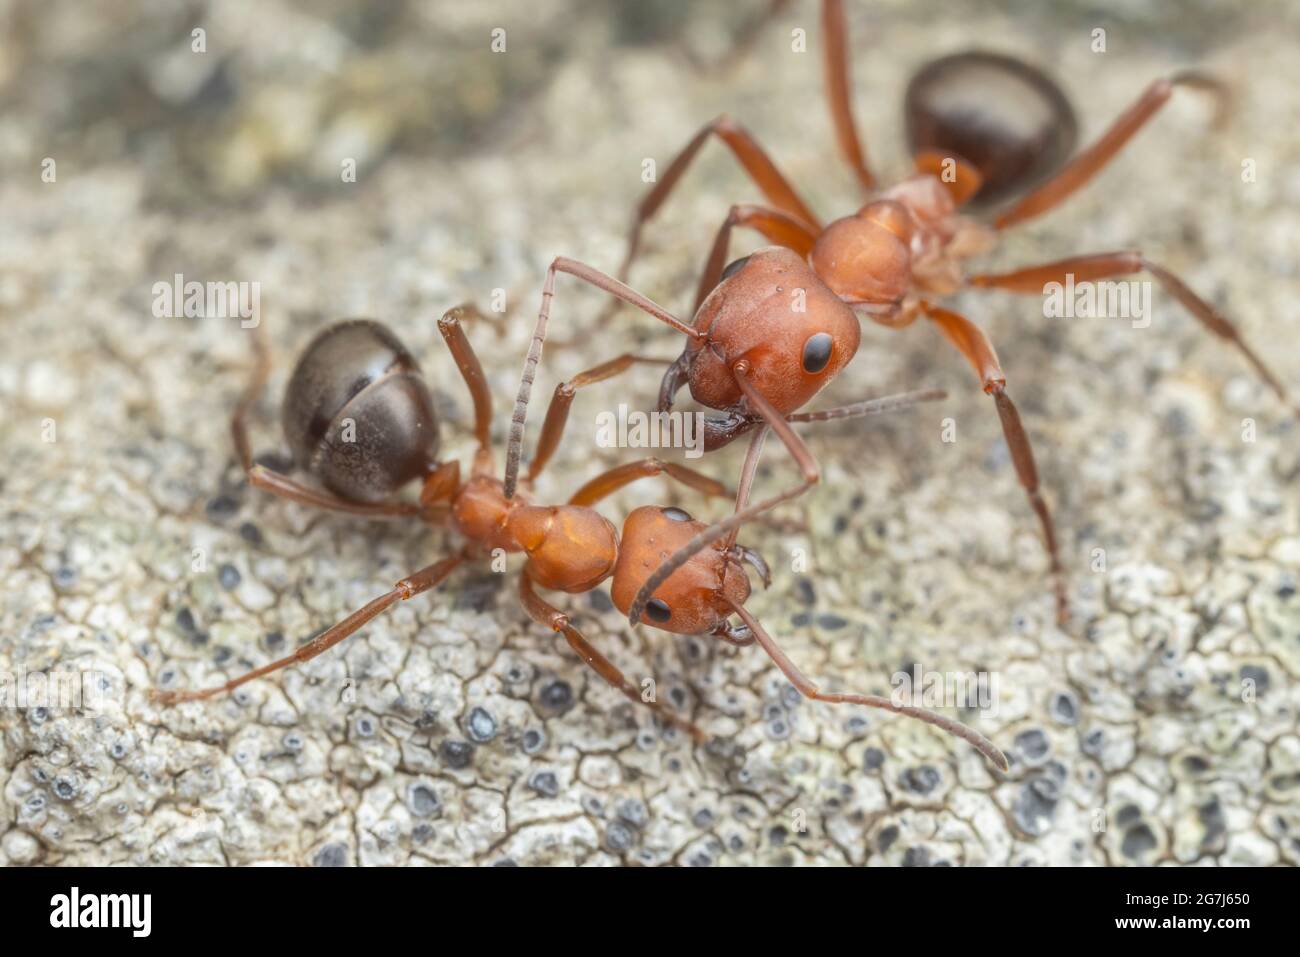 Two Formicine Ant (Formica integra) workers interact. Stock Photo